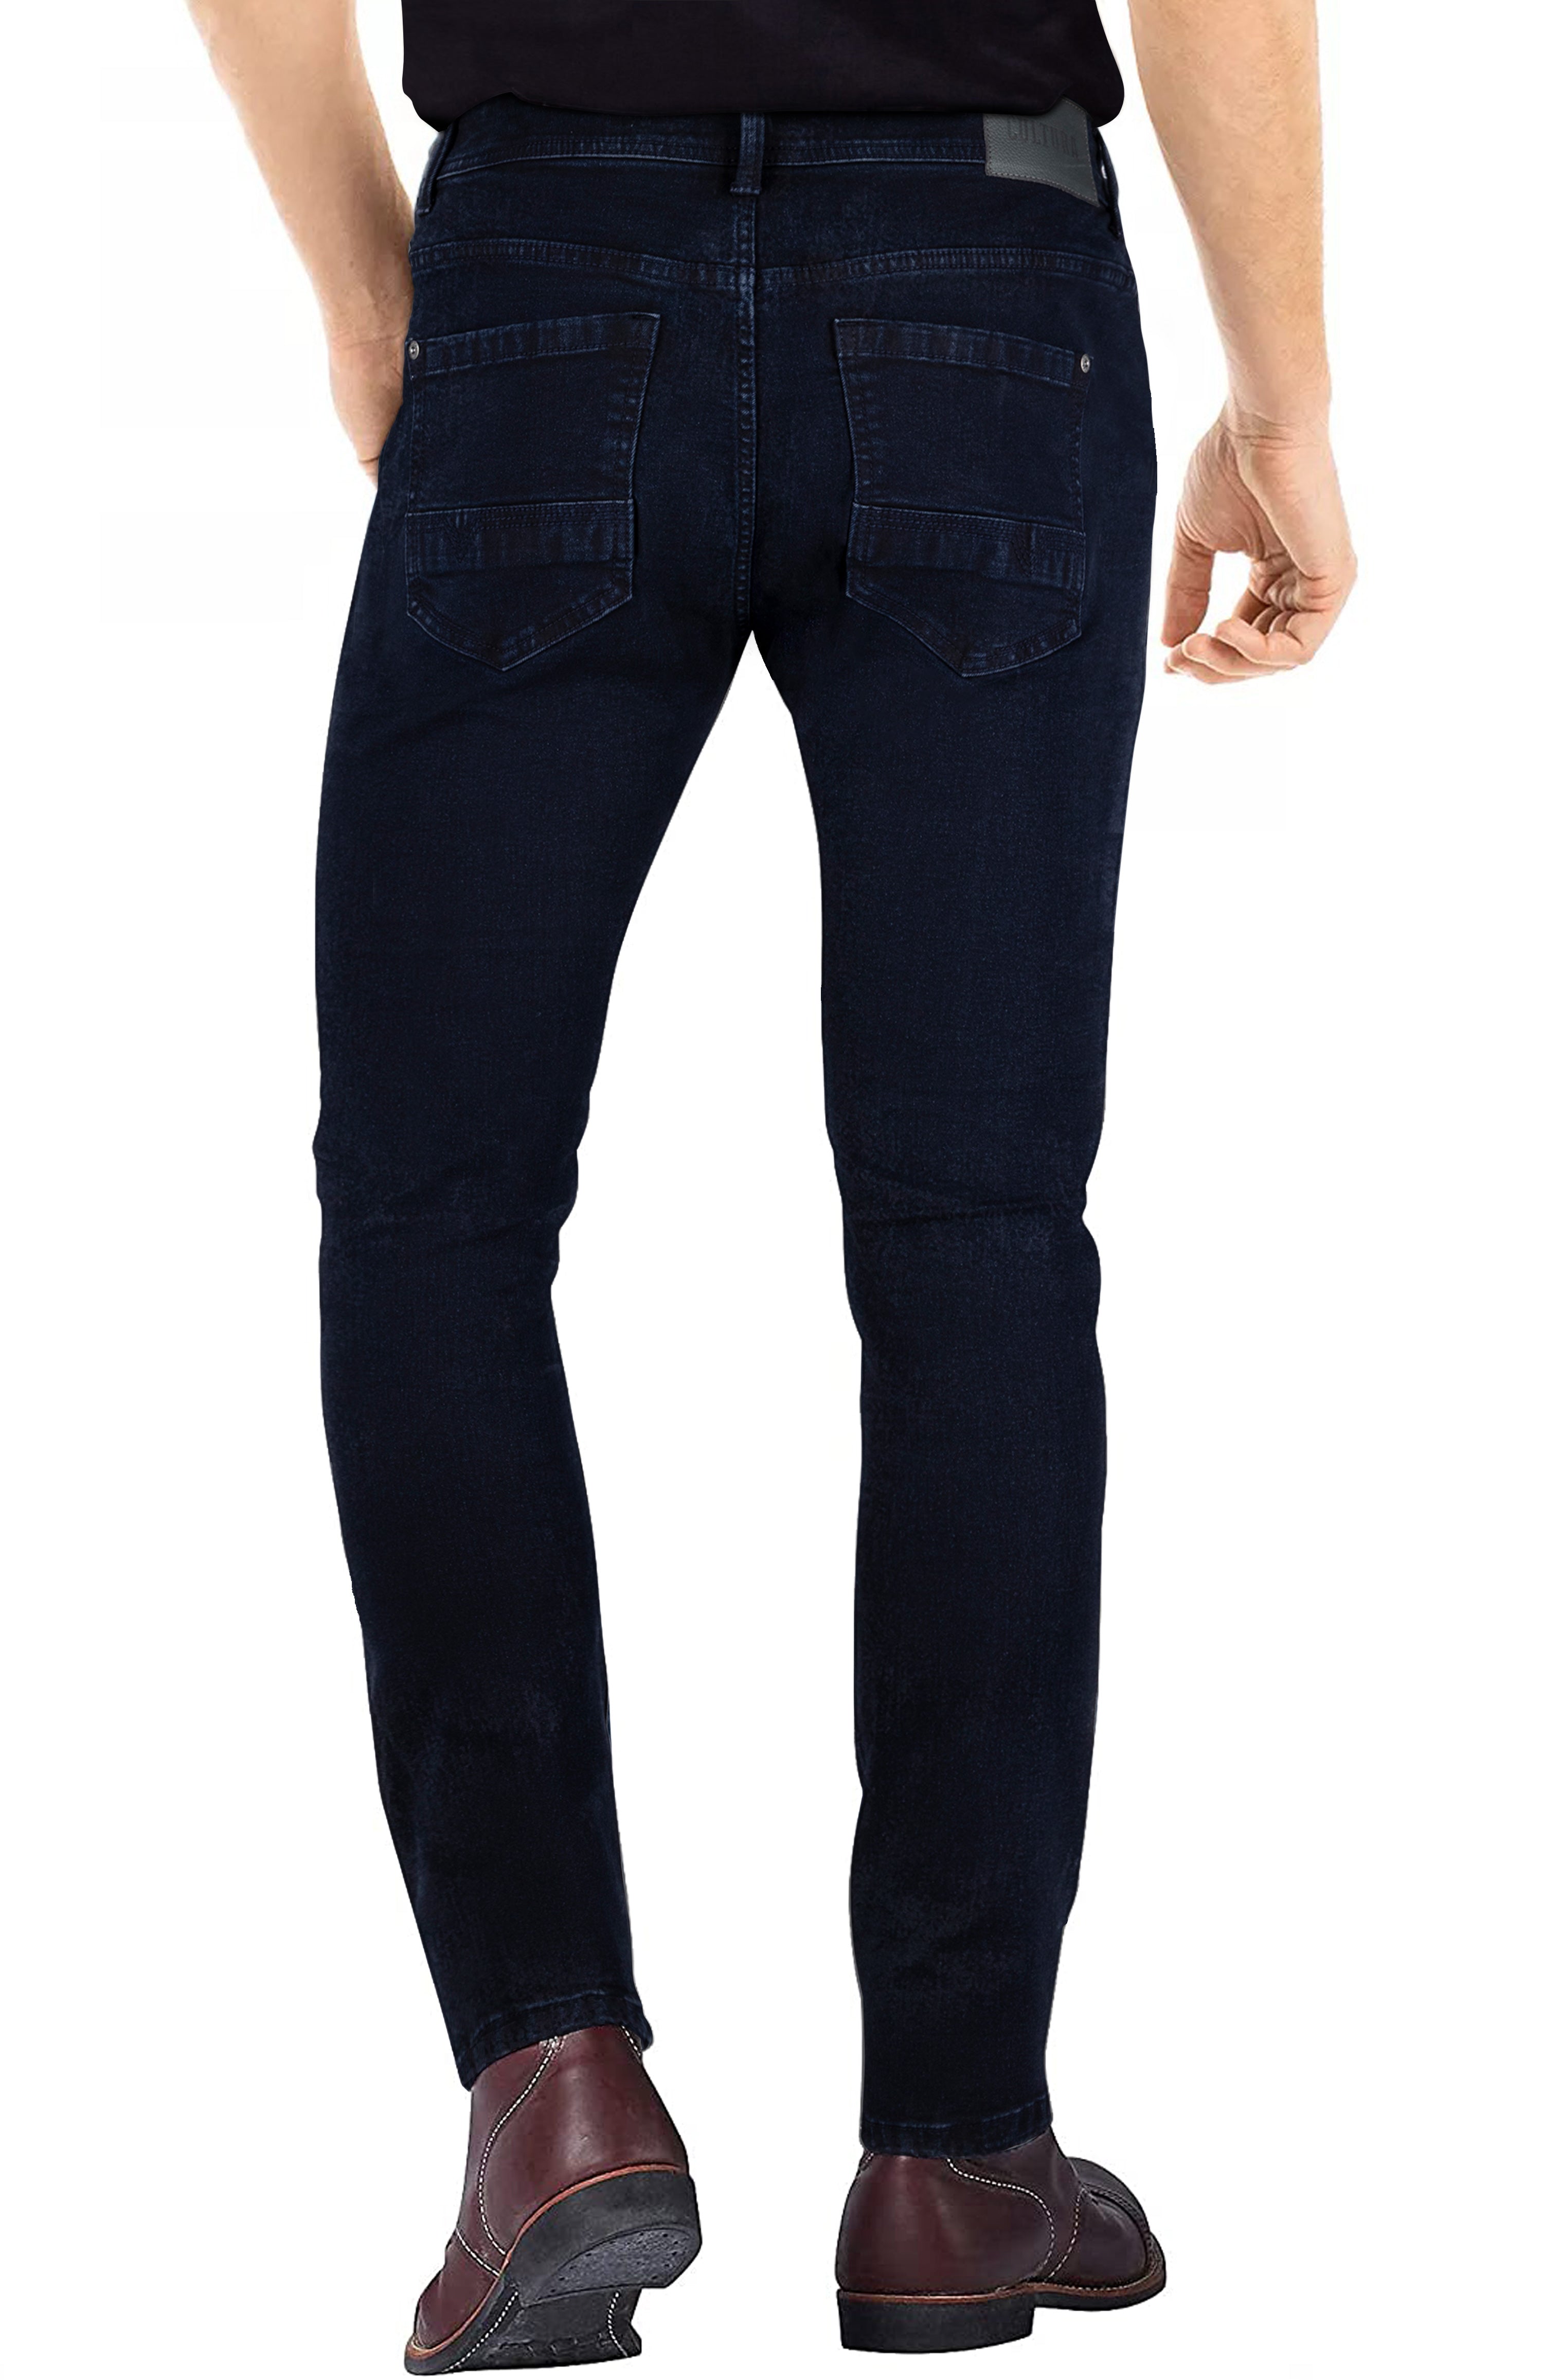 CULTURA AZURE Skinny fit Stretch JEANS Men – Jeans X-RAY for